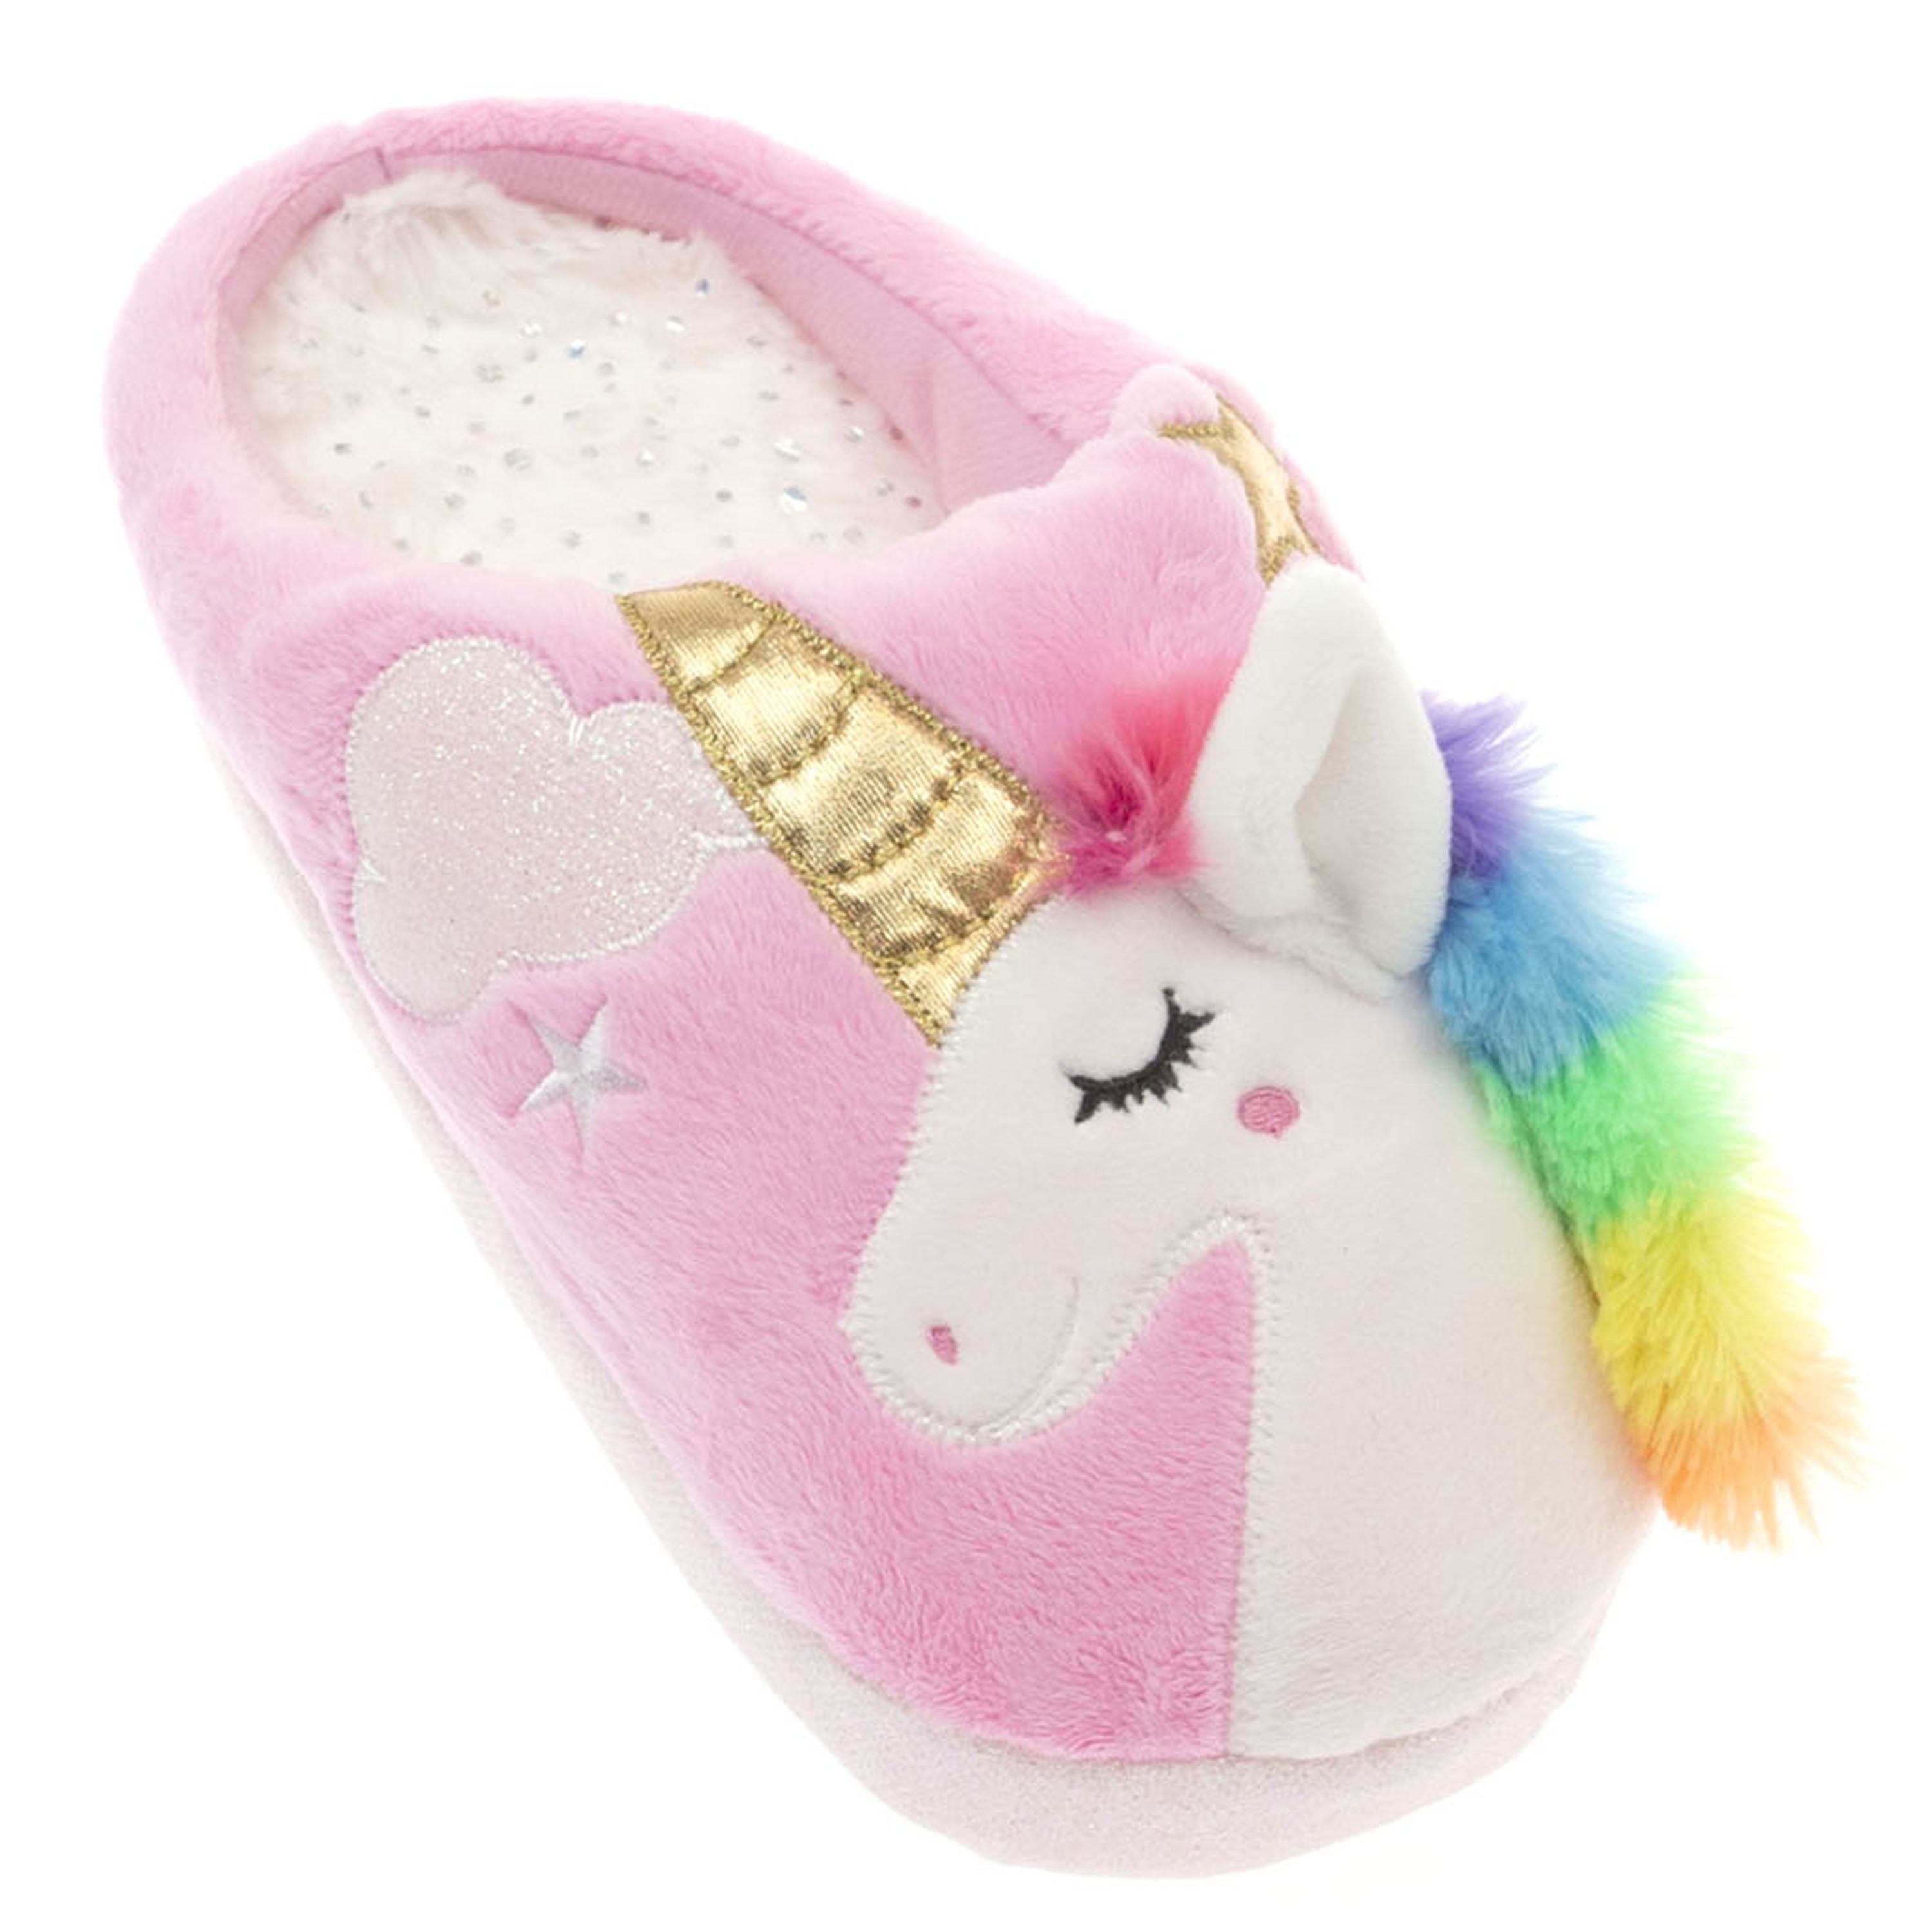 pink bed slippers